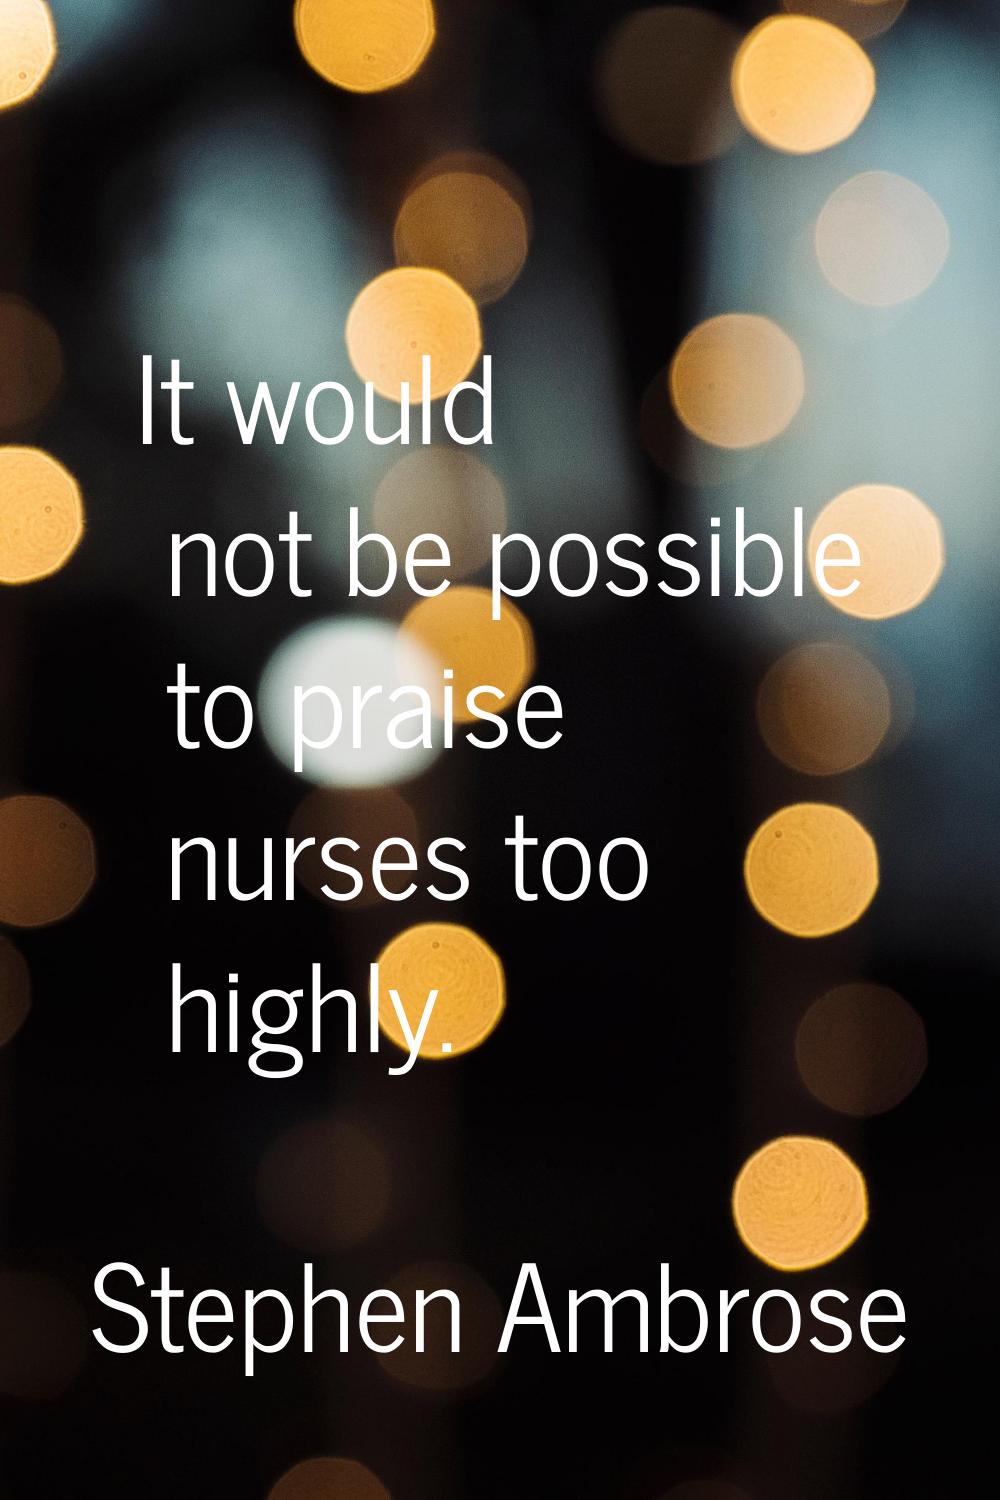 It would not be possible to praise nurses too highly.